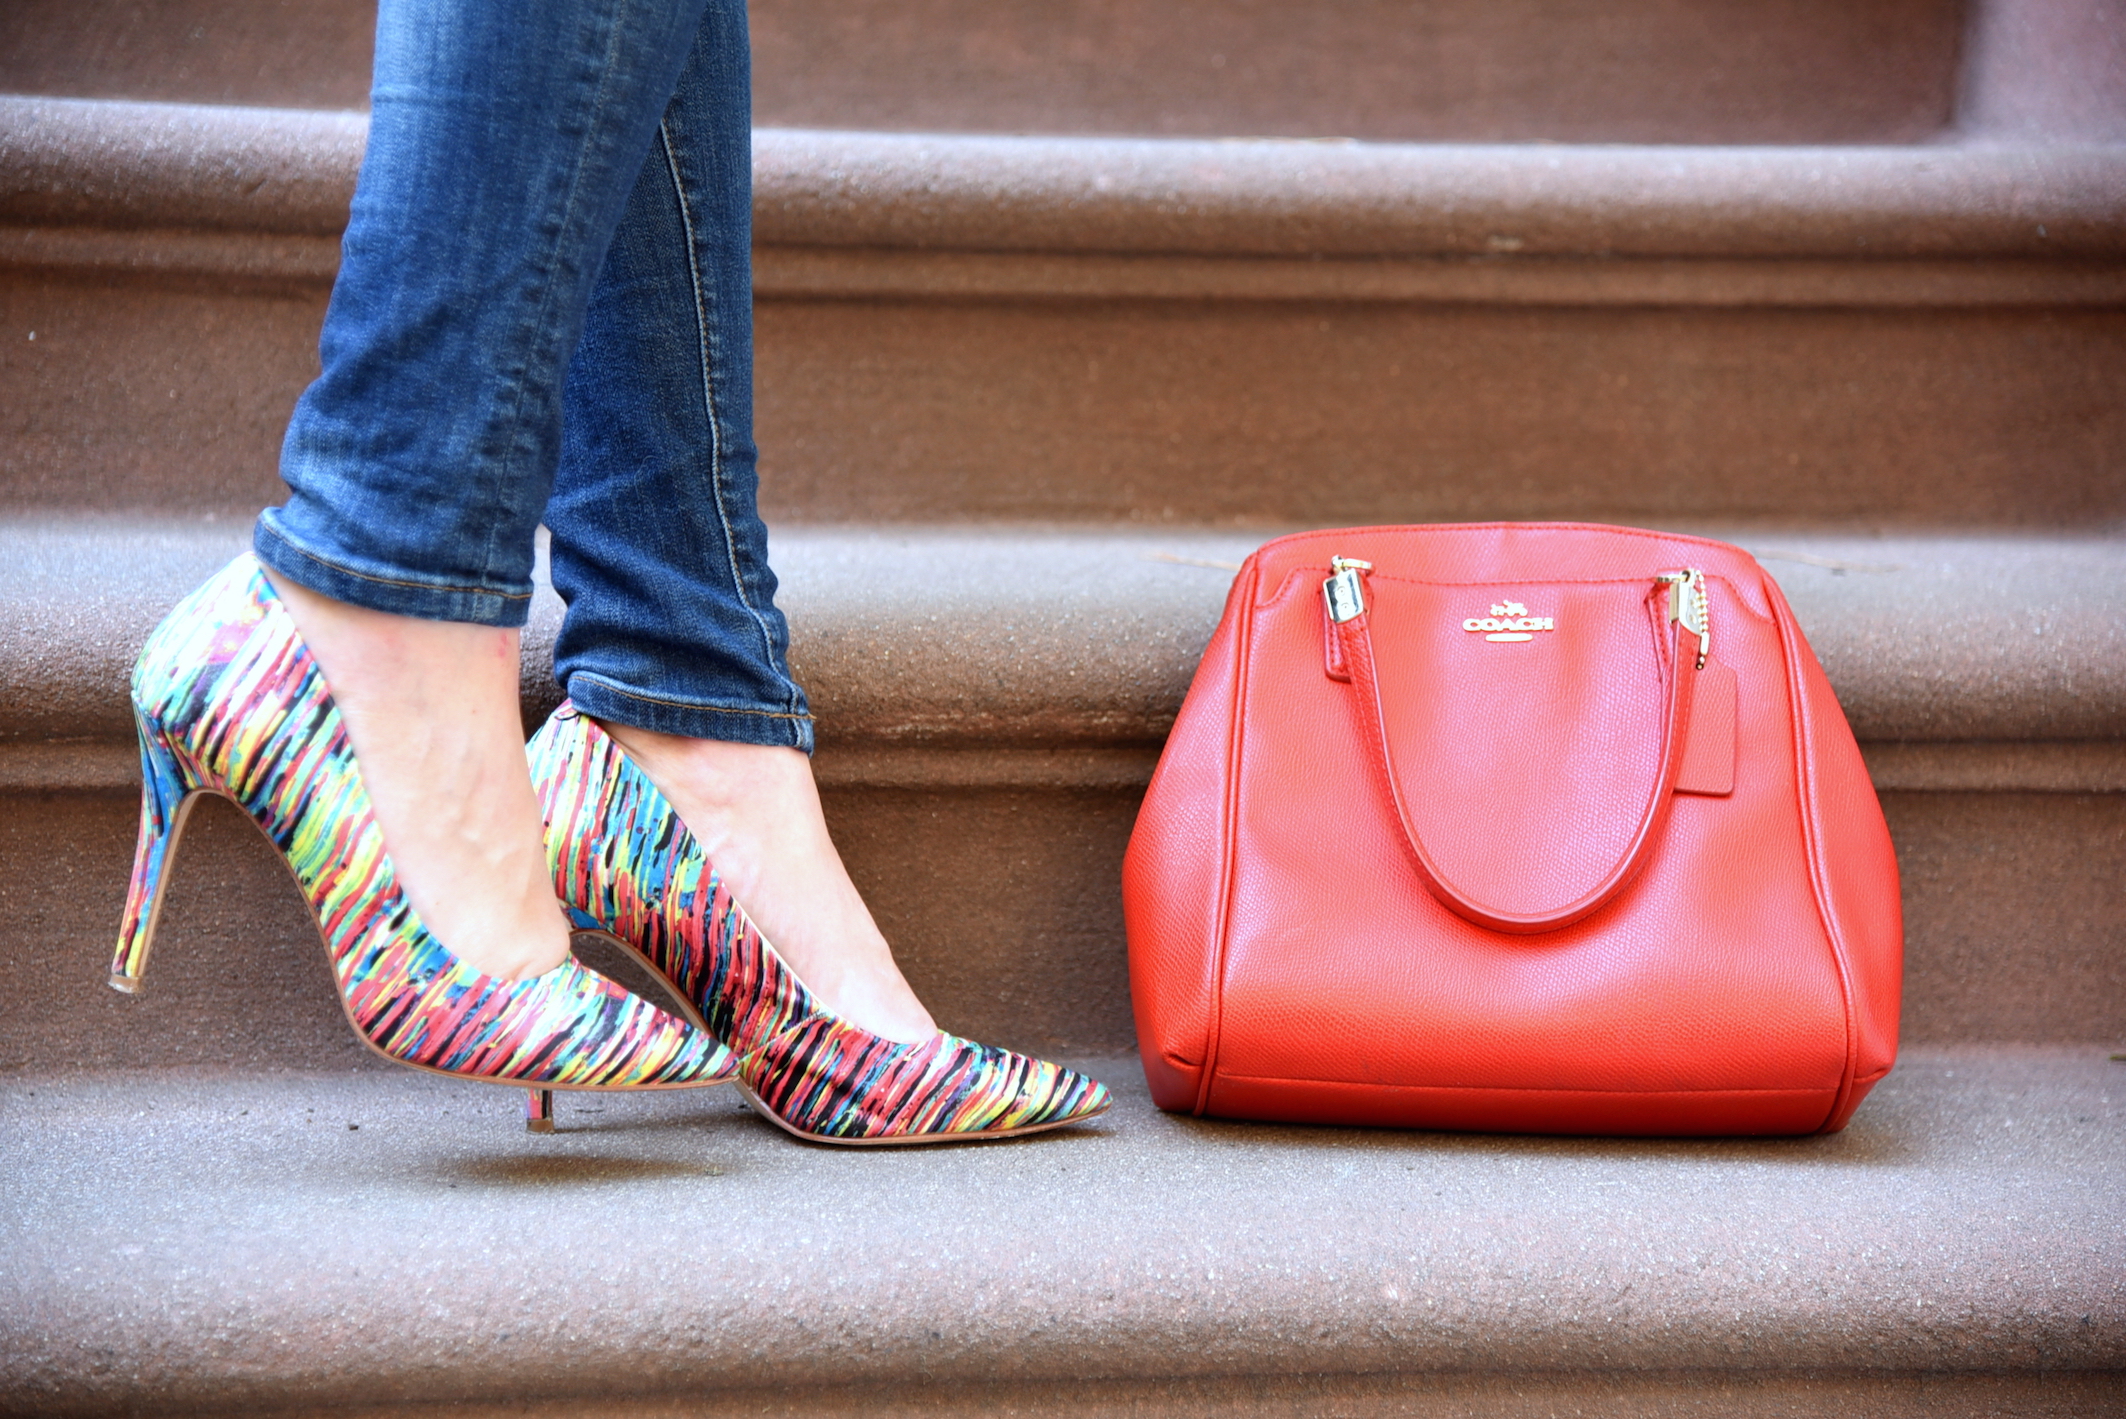 shoes of the day, nyc fashion blogger